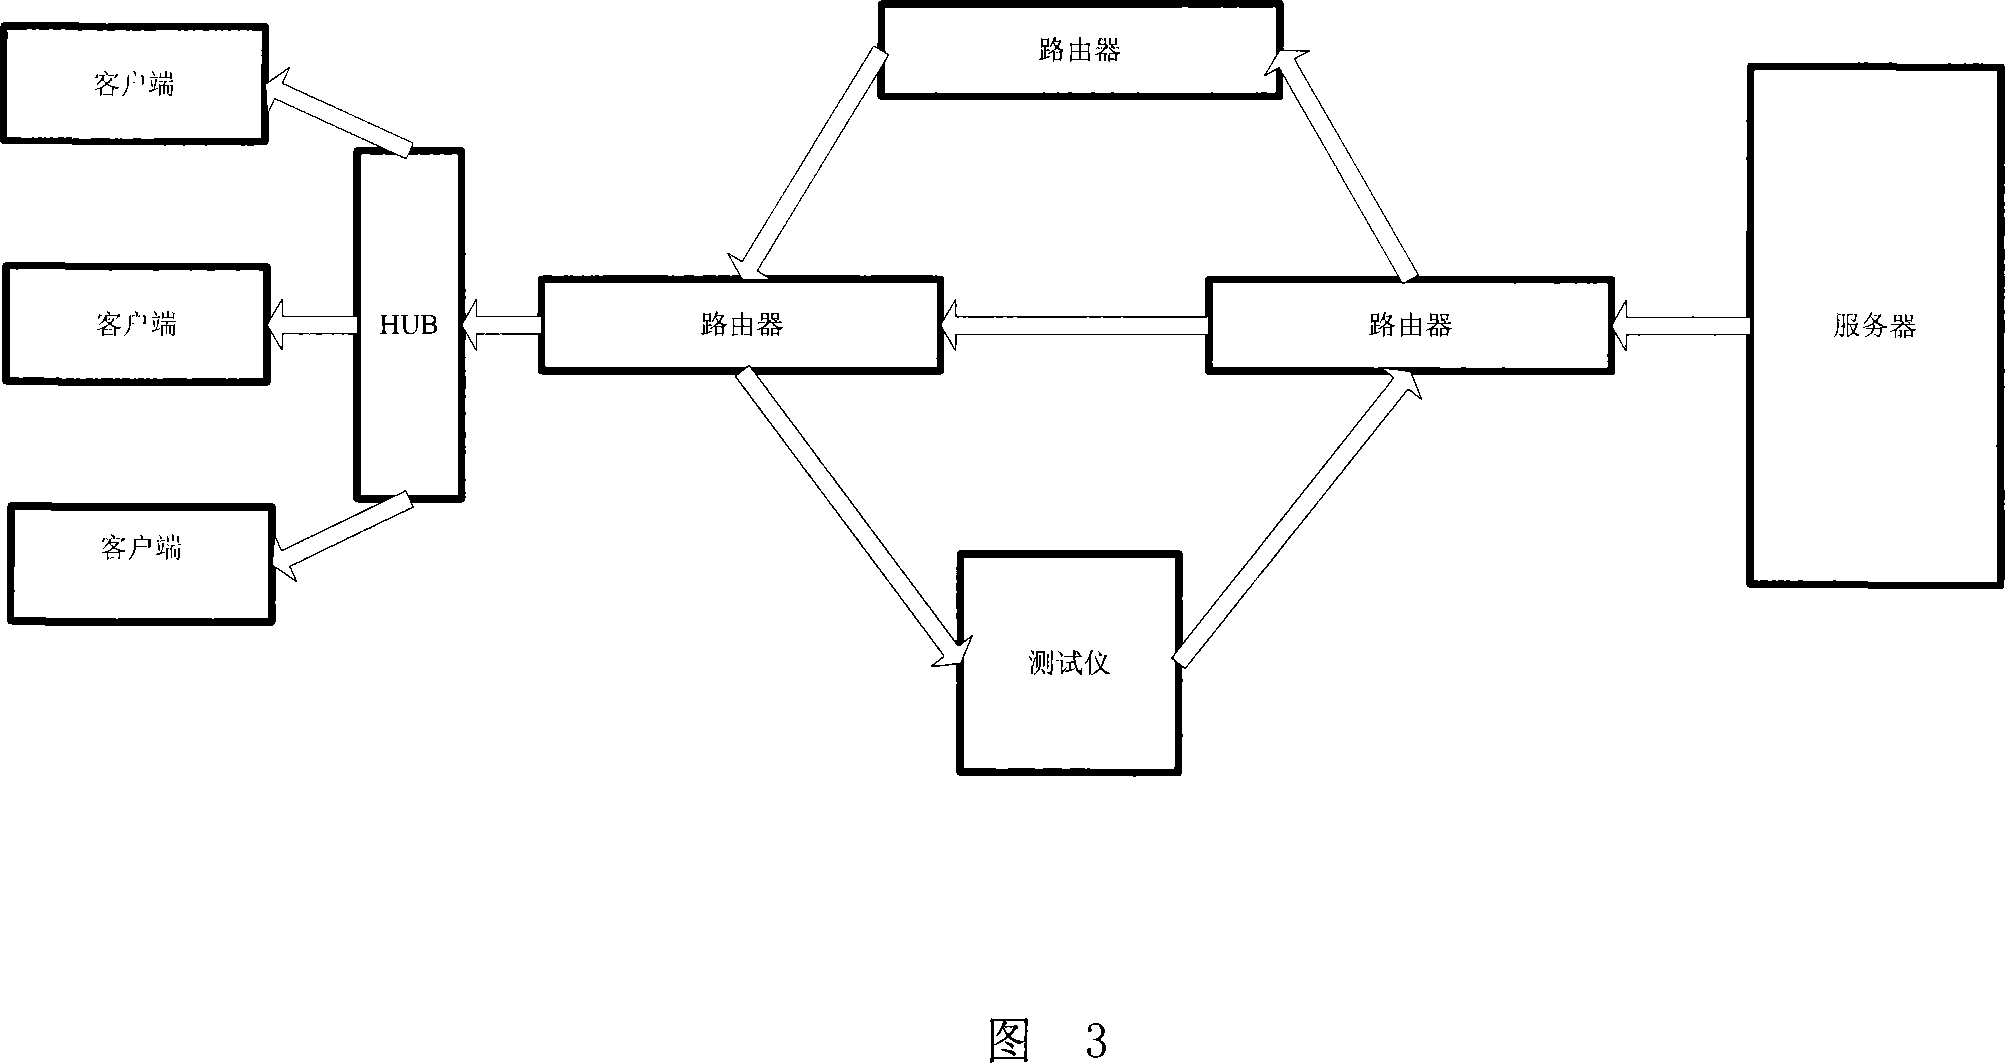 Method for supporting multiplex extraterritorial service quality based on route information protocol